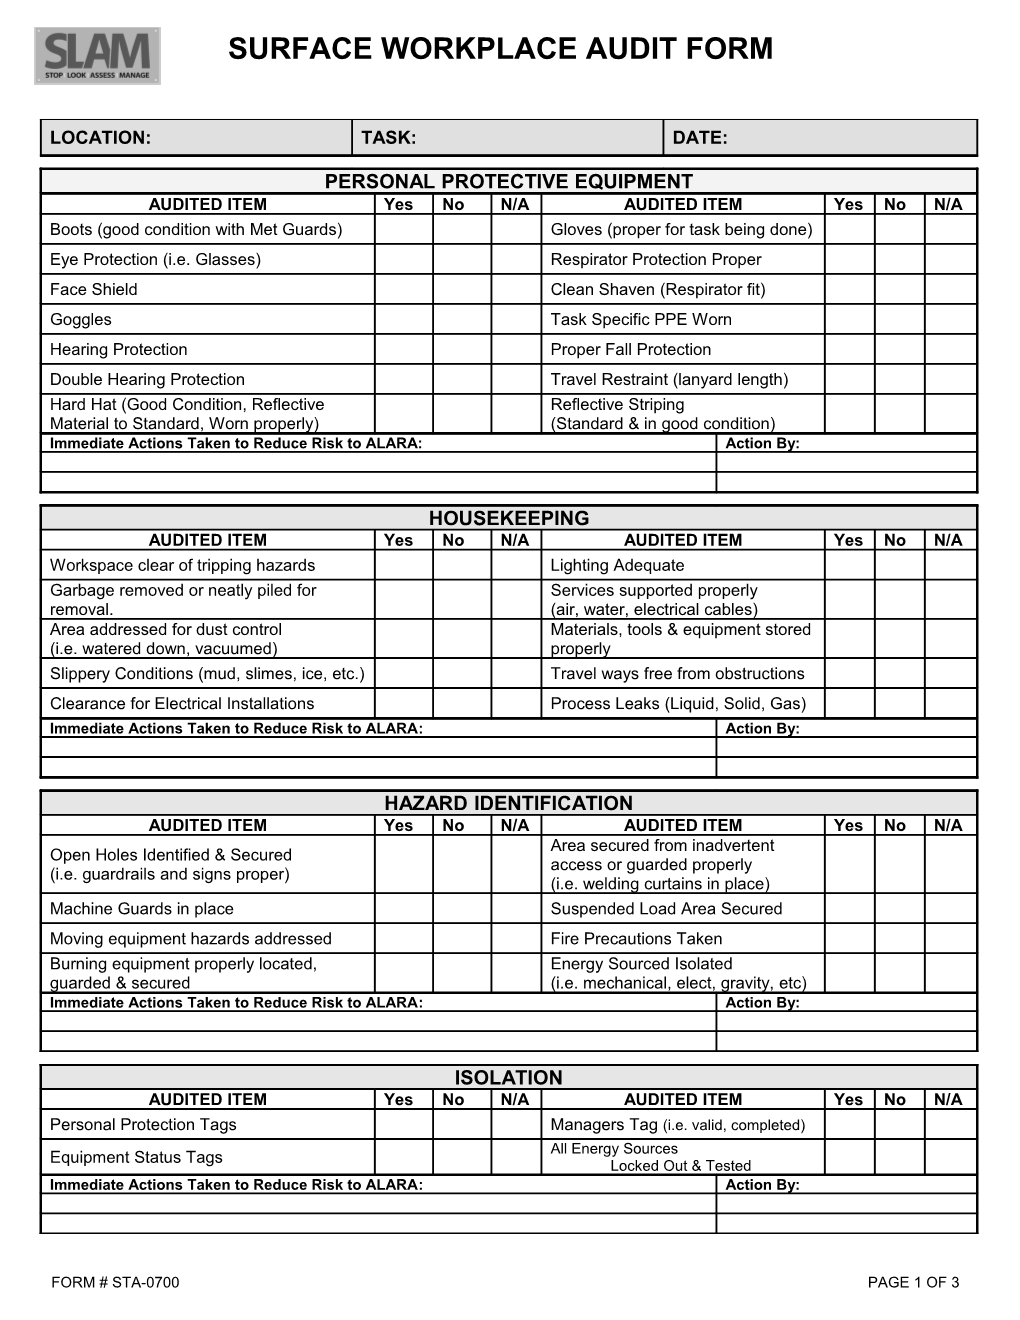 Form # - STA-0443 OPERATING WORKPLACE AUDIT FORM